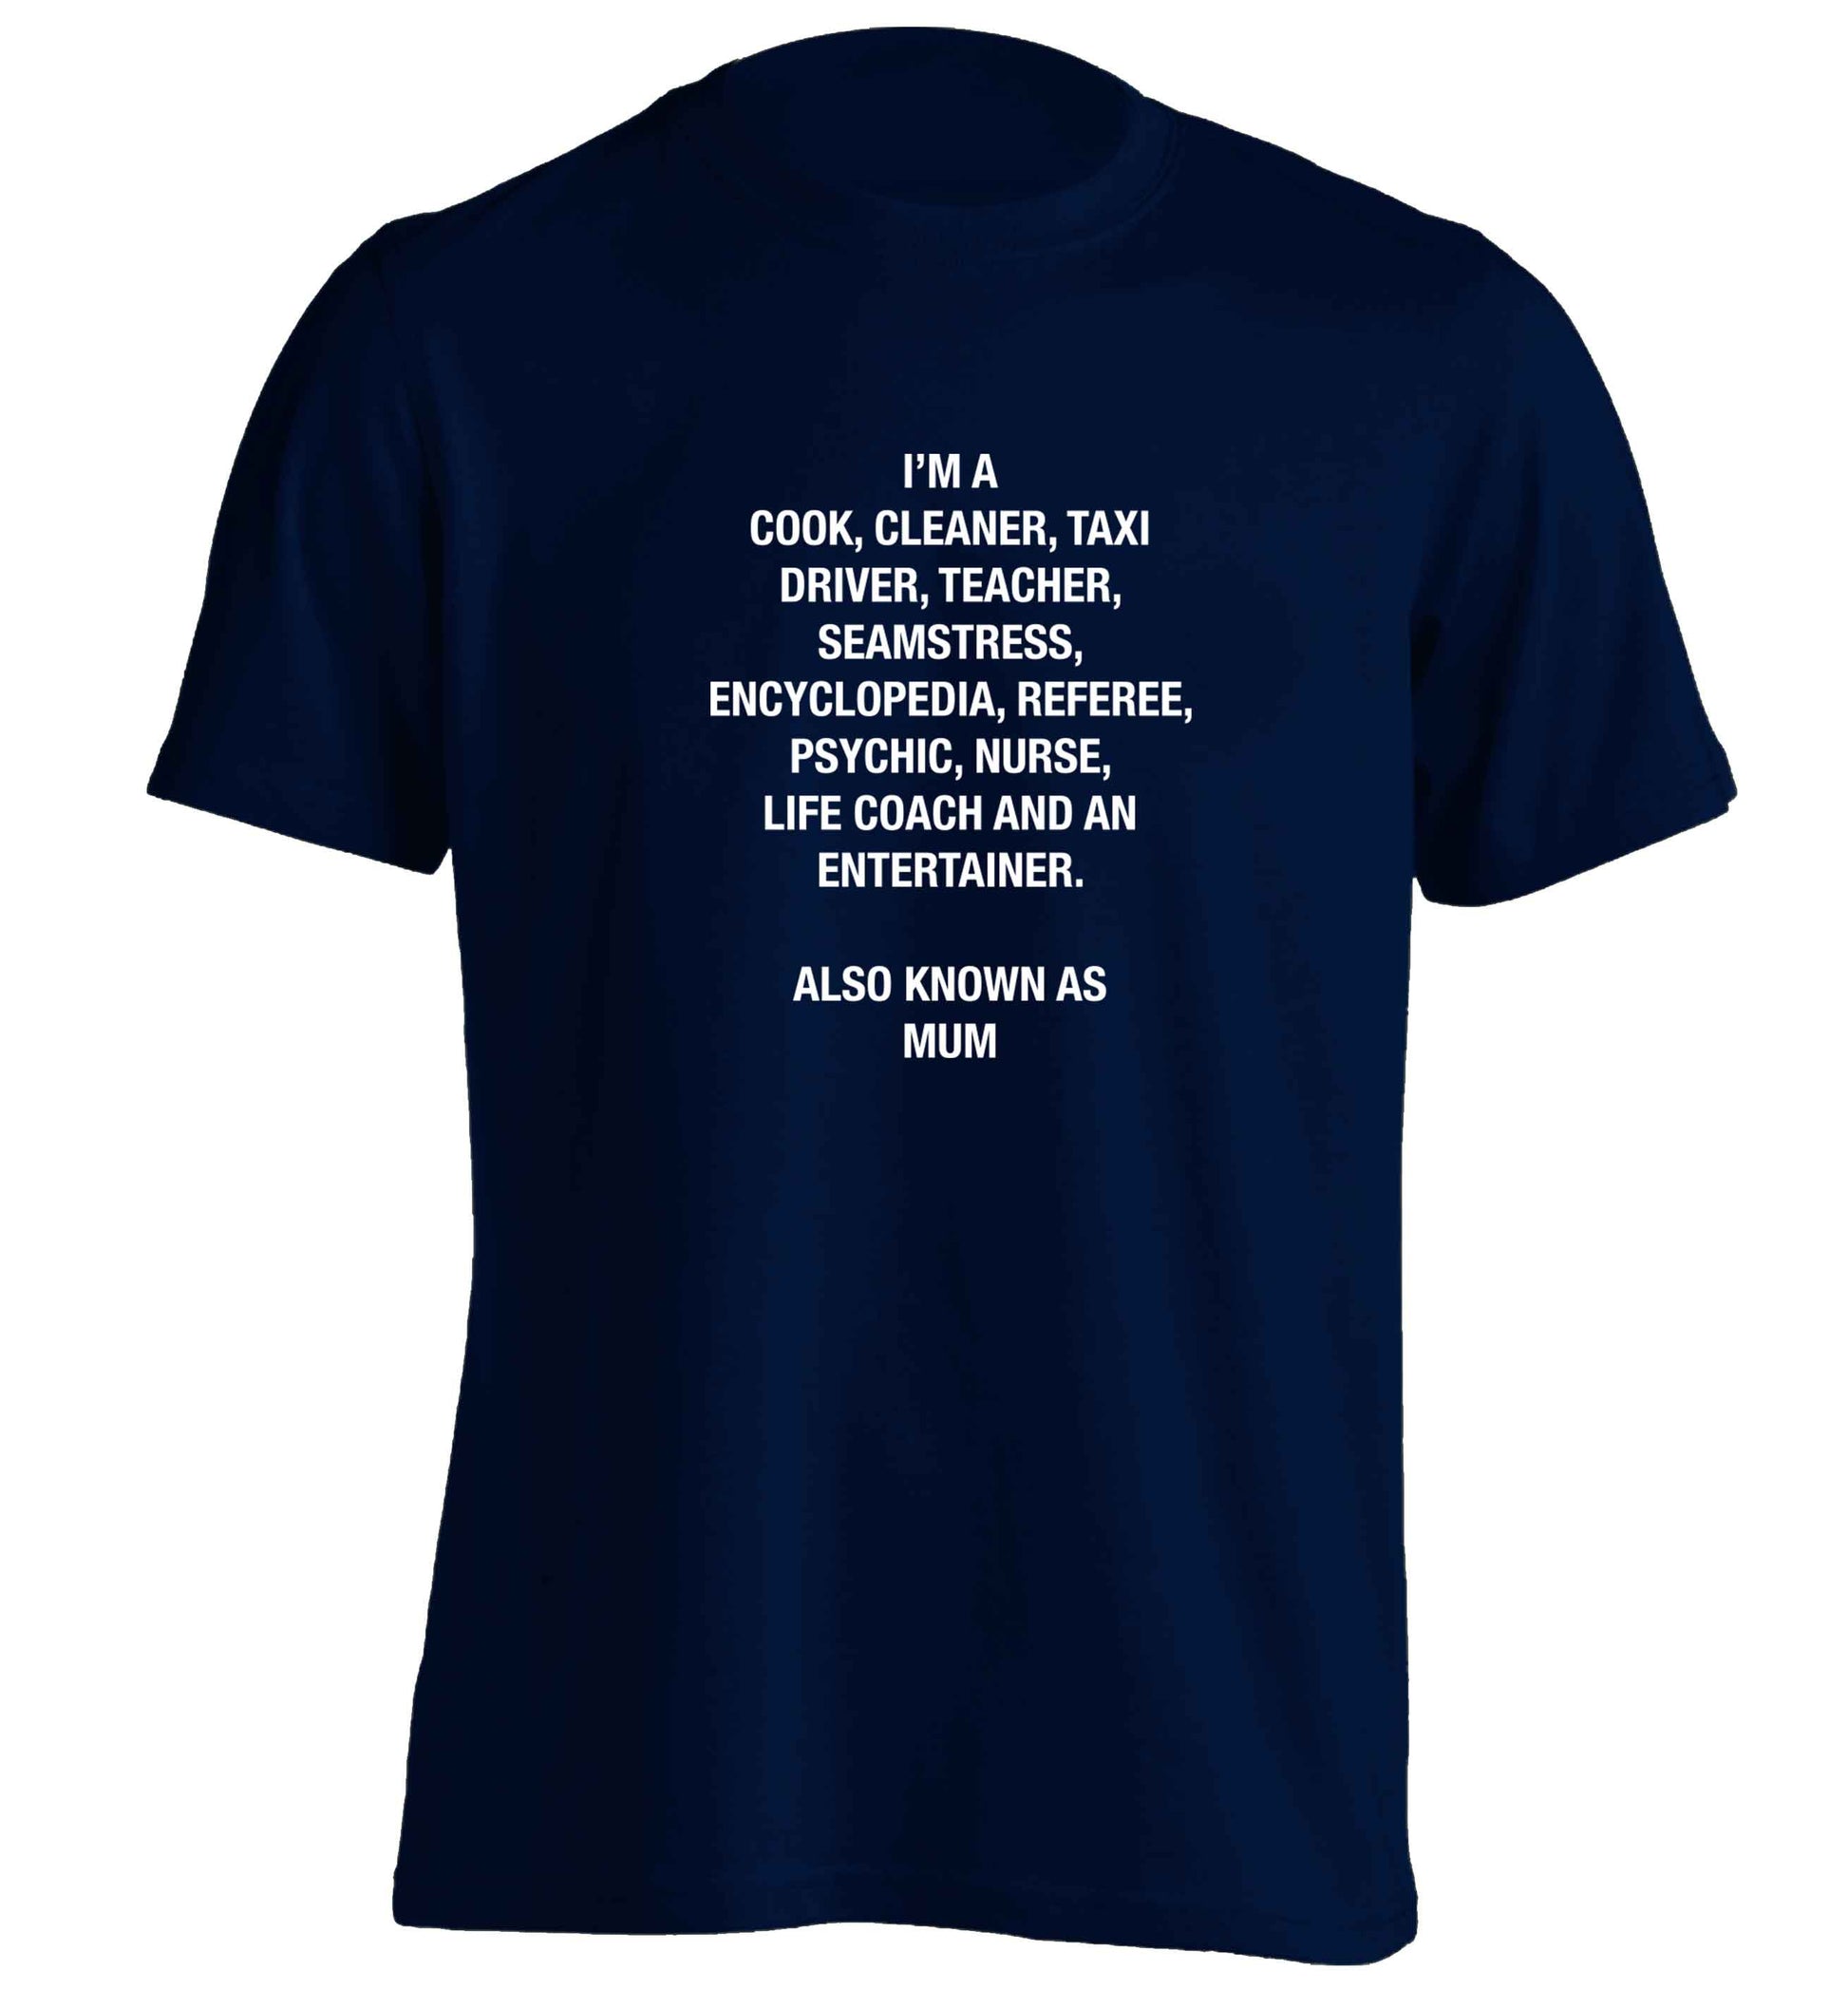 Funny gifts for your mum on mother's dayor her birthday! Mum, cook, cleaner, taxi driver, teacher, seamstress, encyclopedia, referee, psychic, nurse, life coach and entertainer adults unisex navy Tshirt 2XL